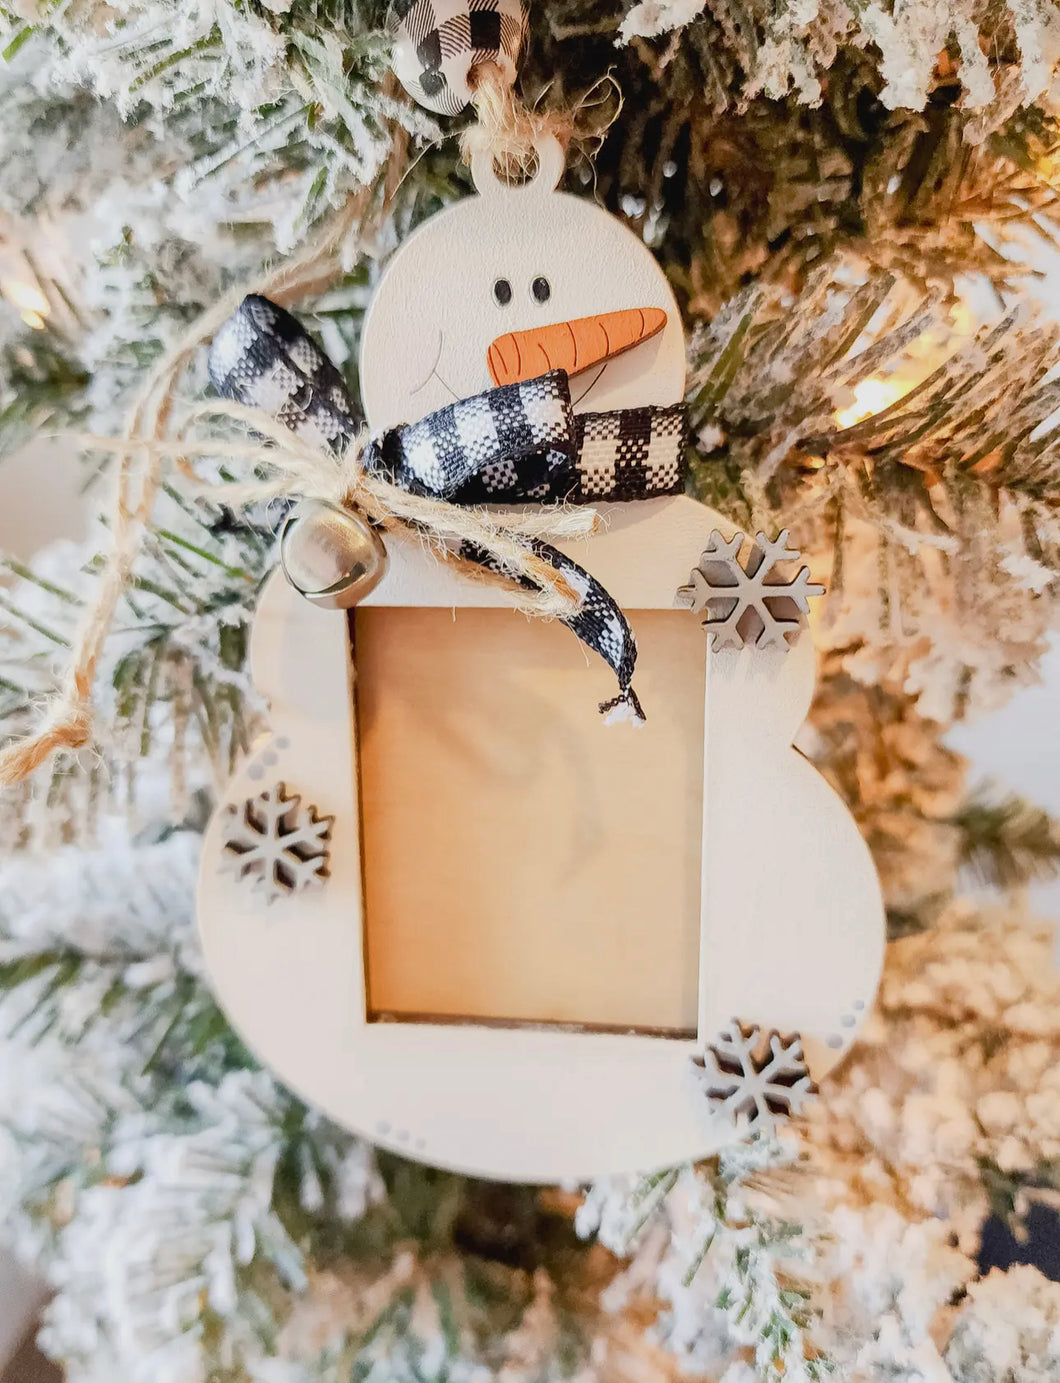 Snowman ornament with picture slot